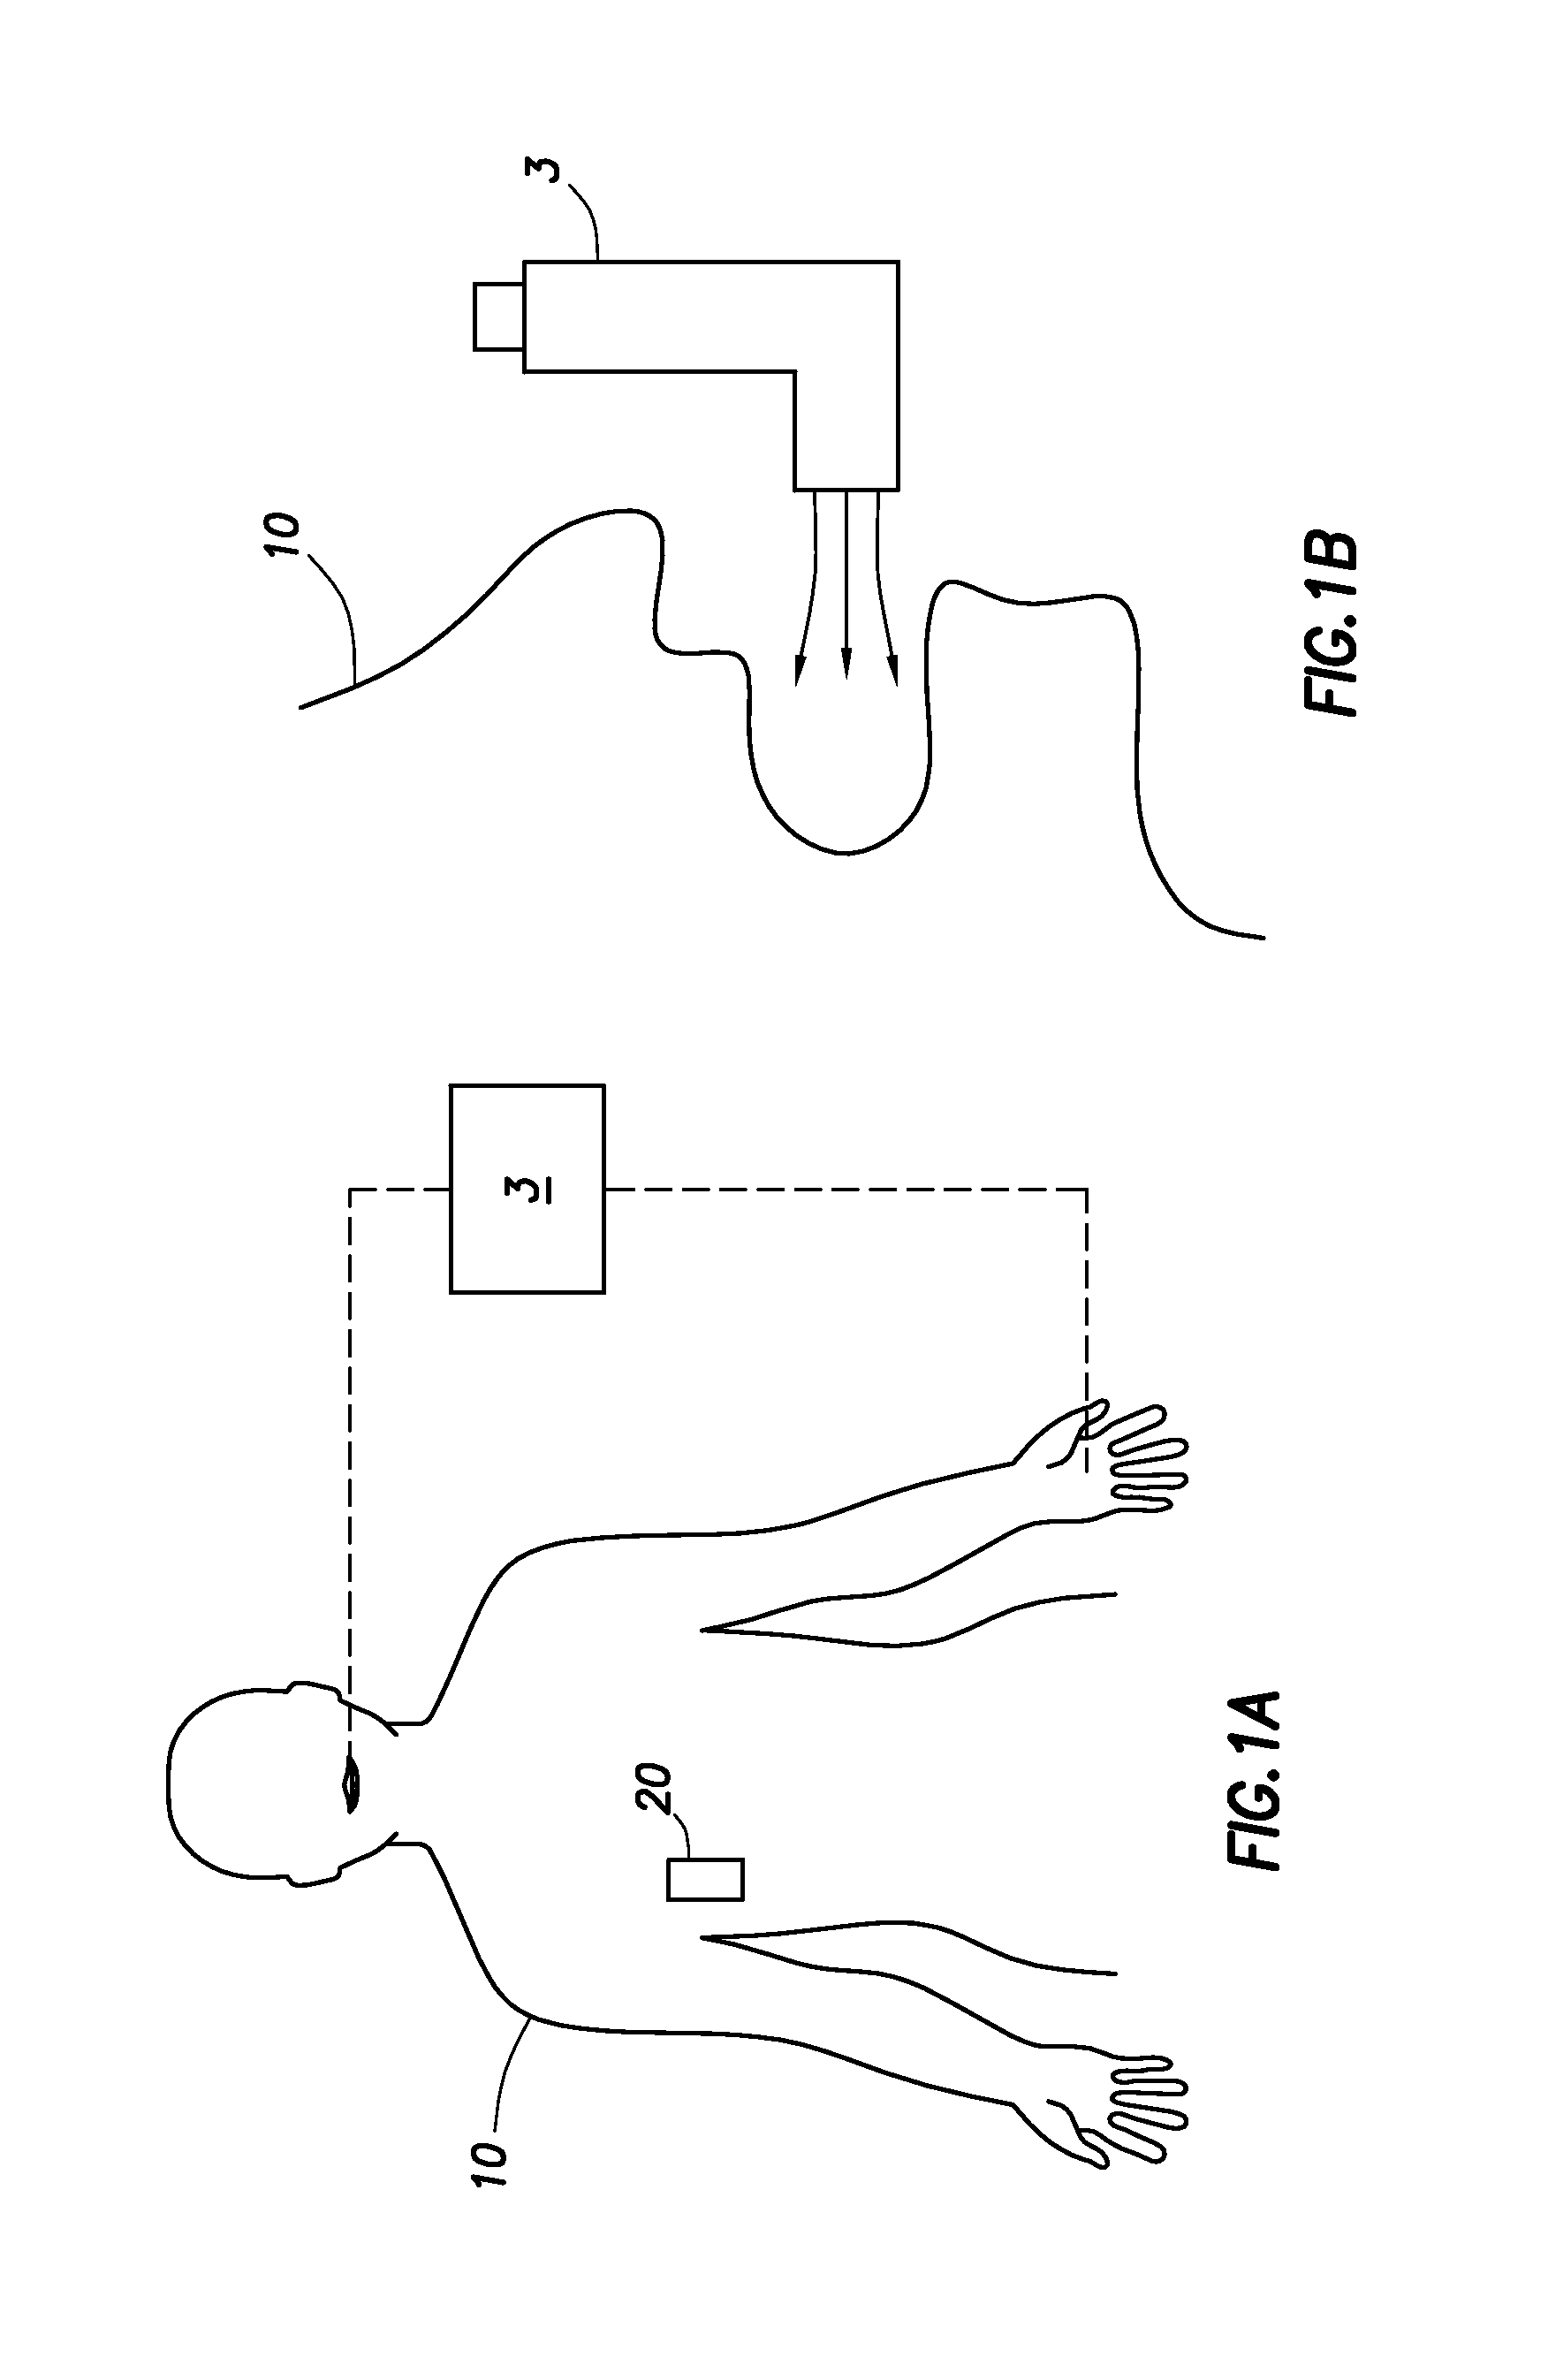 Apparatus, system and method for detection and delivery of a medicinal dose